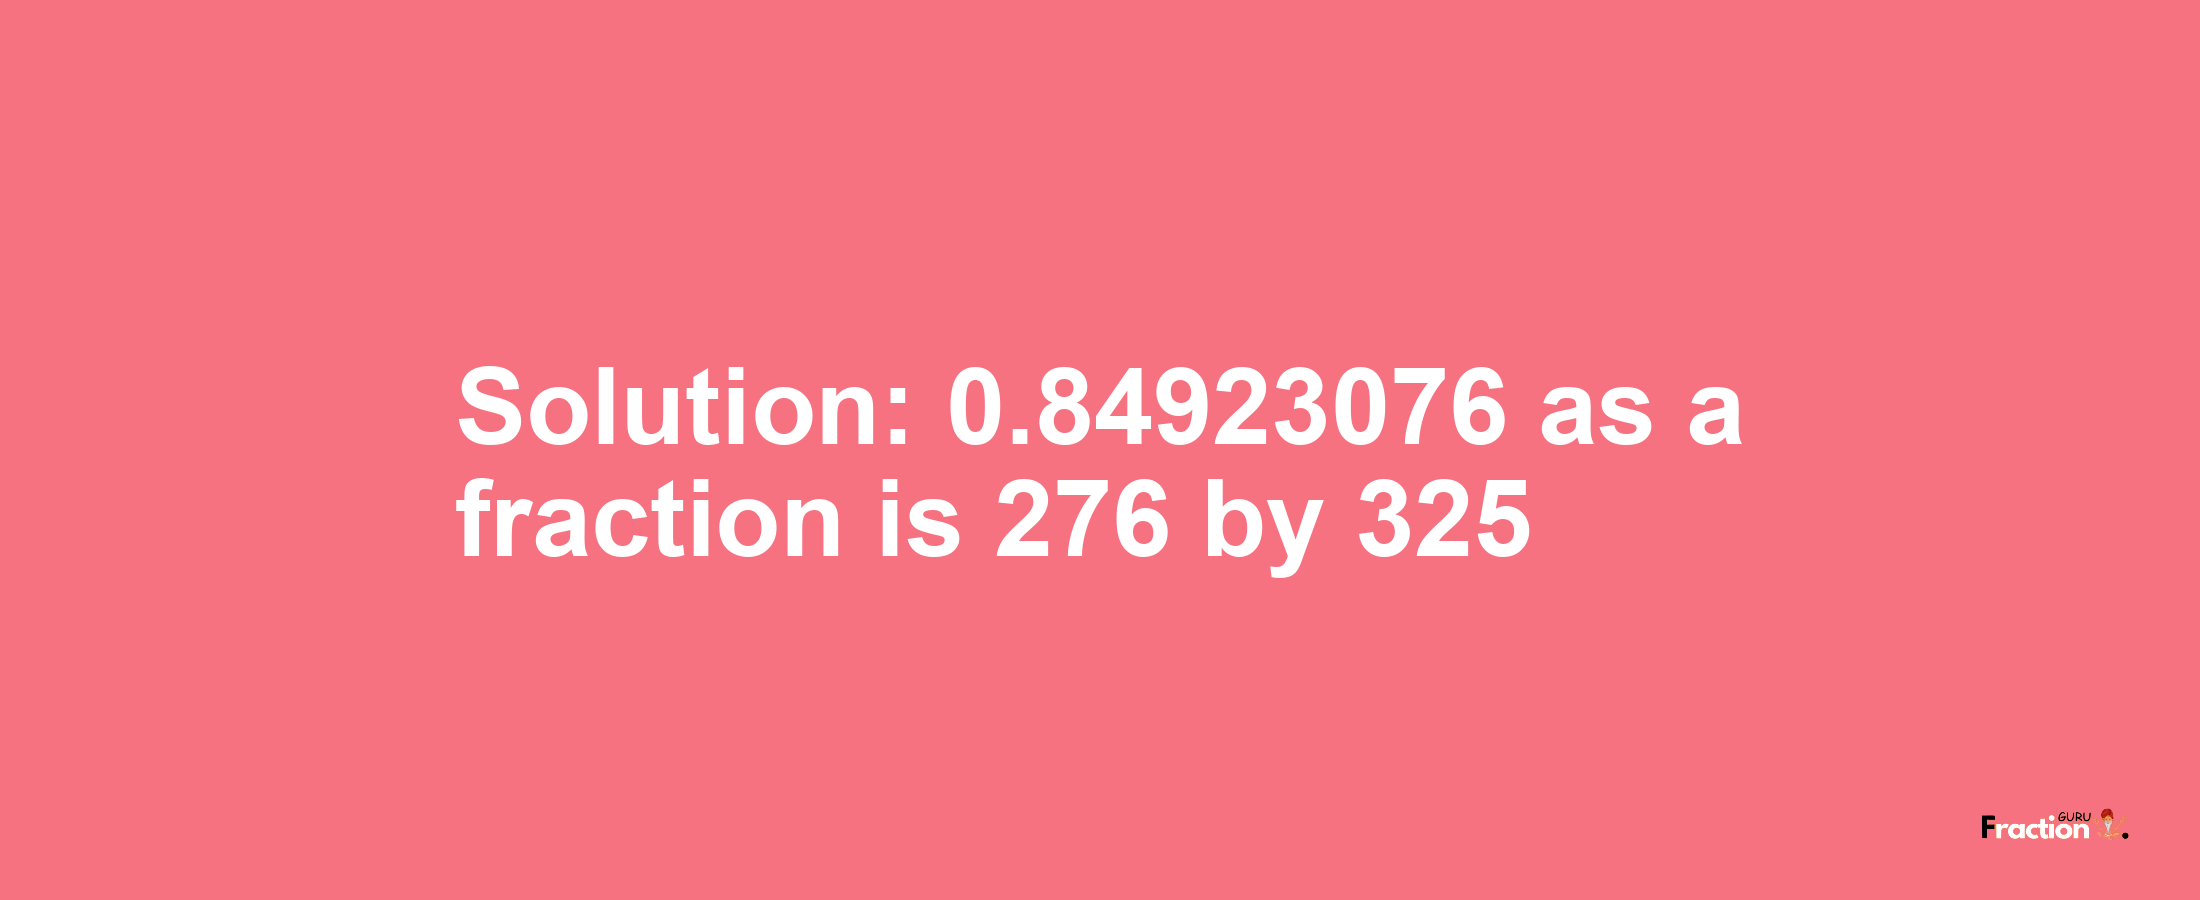 Solution:0.84923076 as a fraction is 276/325